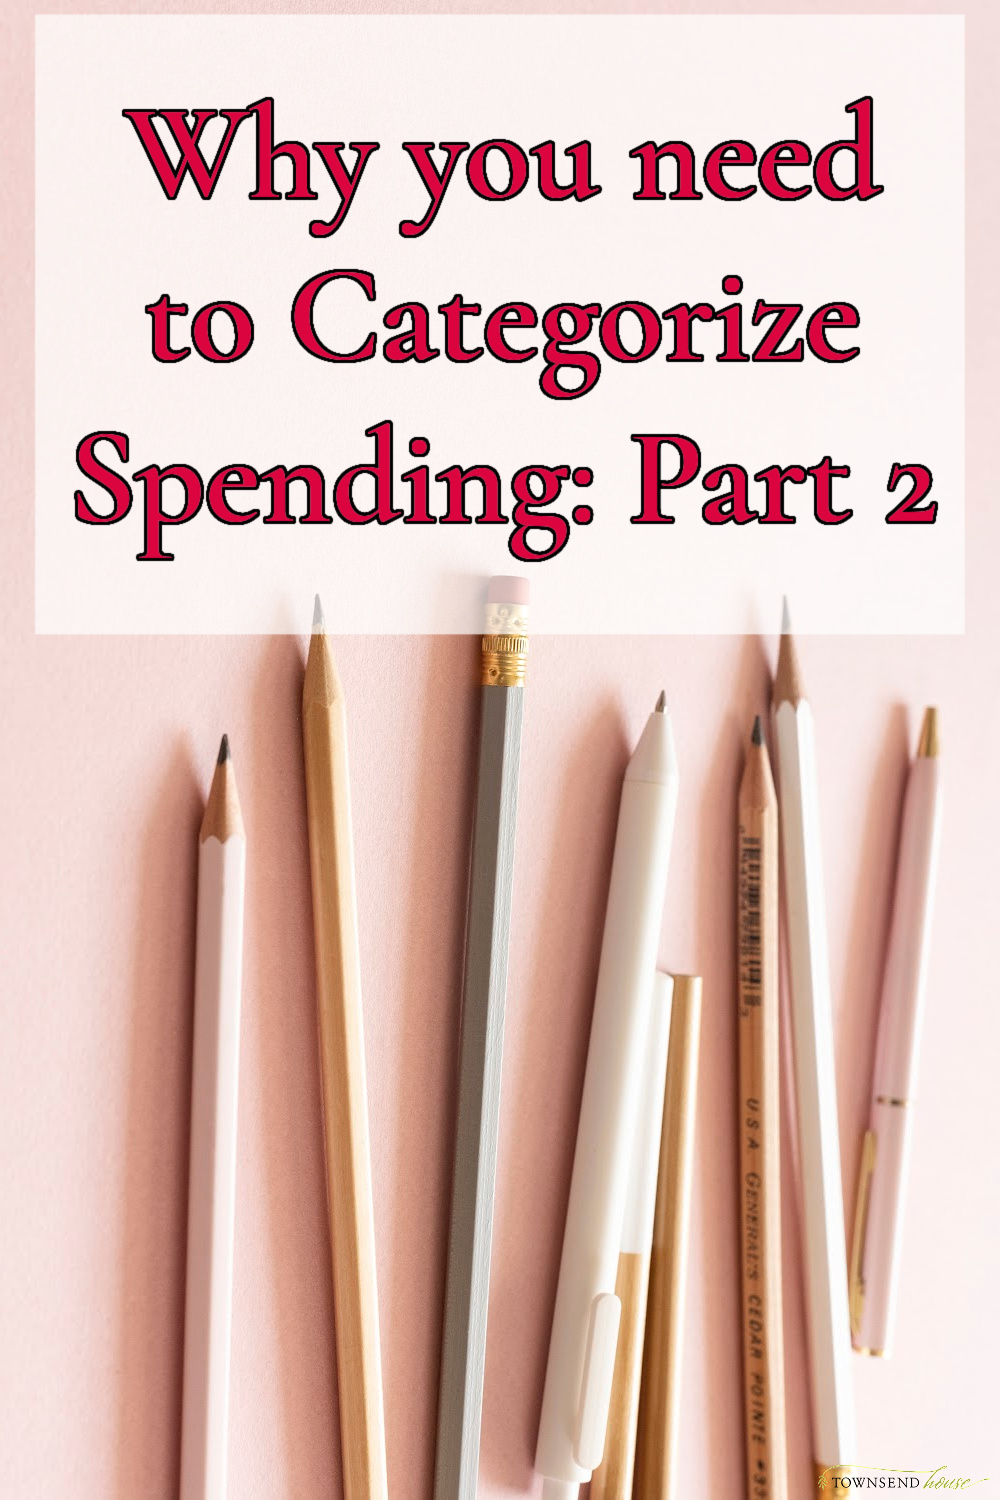 Why you need to Categorize your Spending